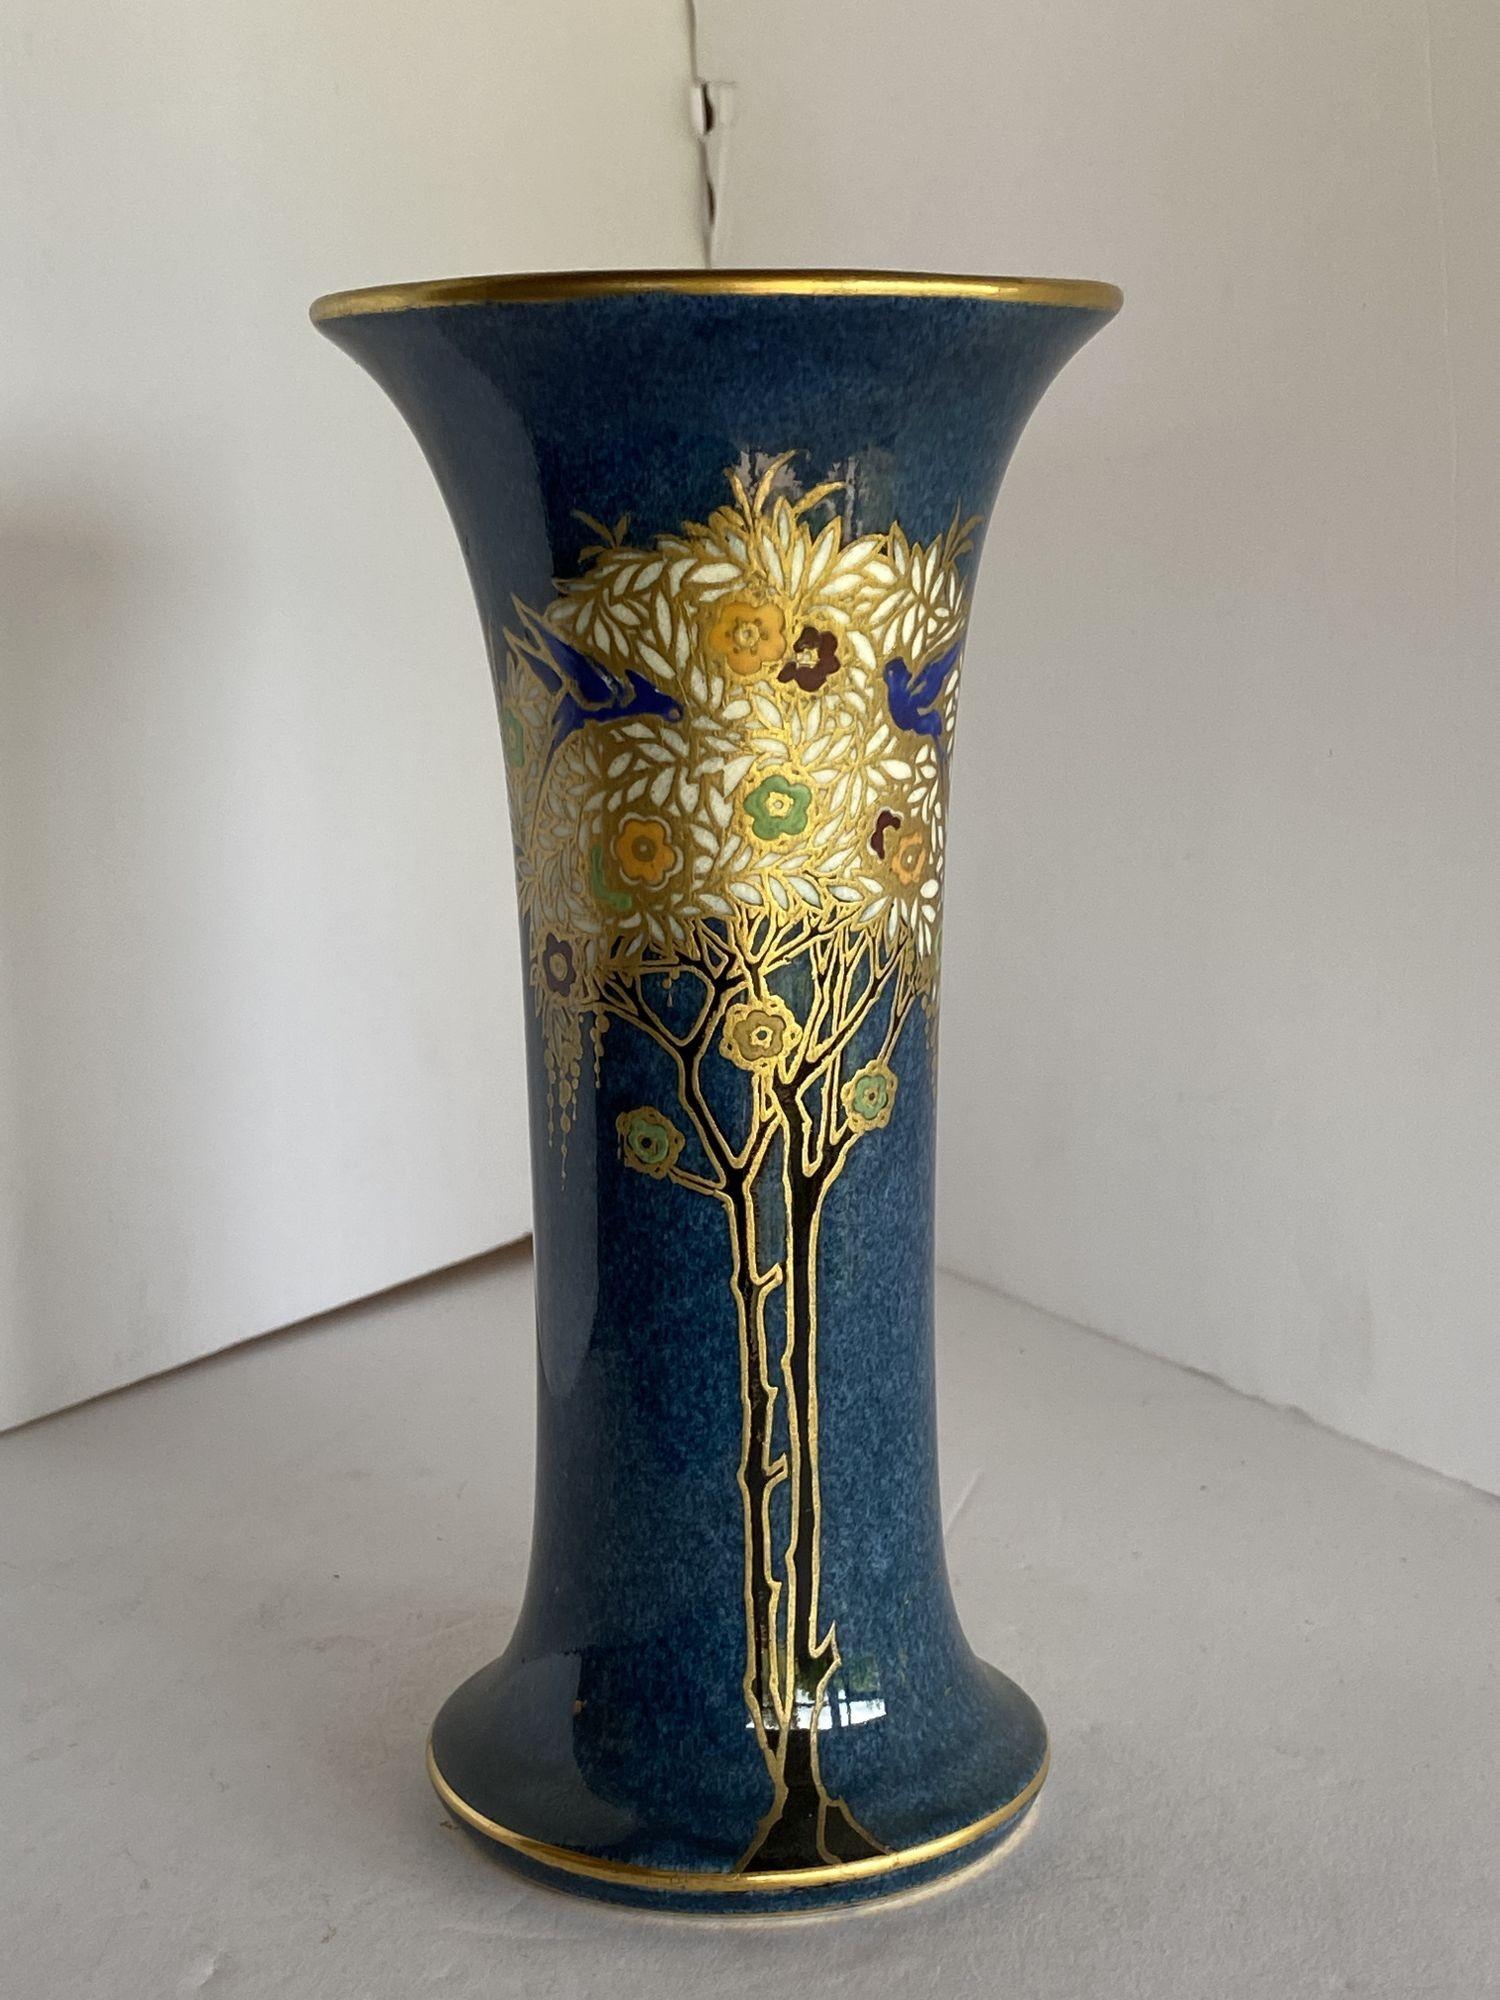 A Royal Worcester vase with a hand-painted gold leaf floral in an almost Gustav Klimt style.
 
Signed Shape G923 Date code 1890.